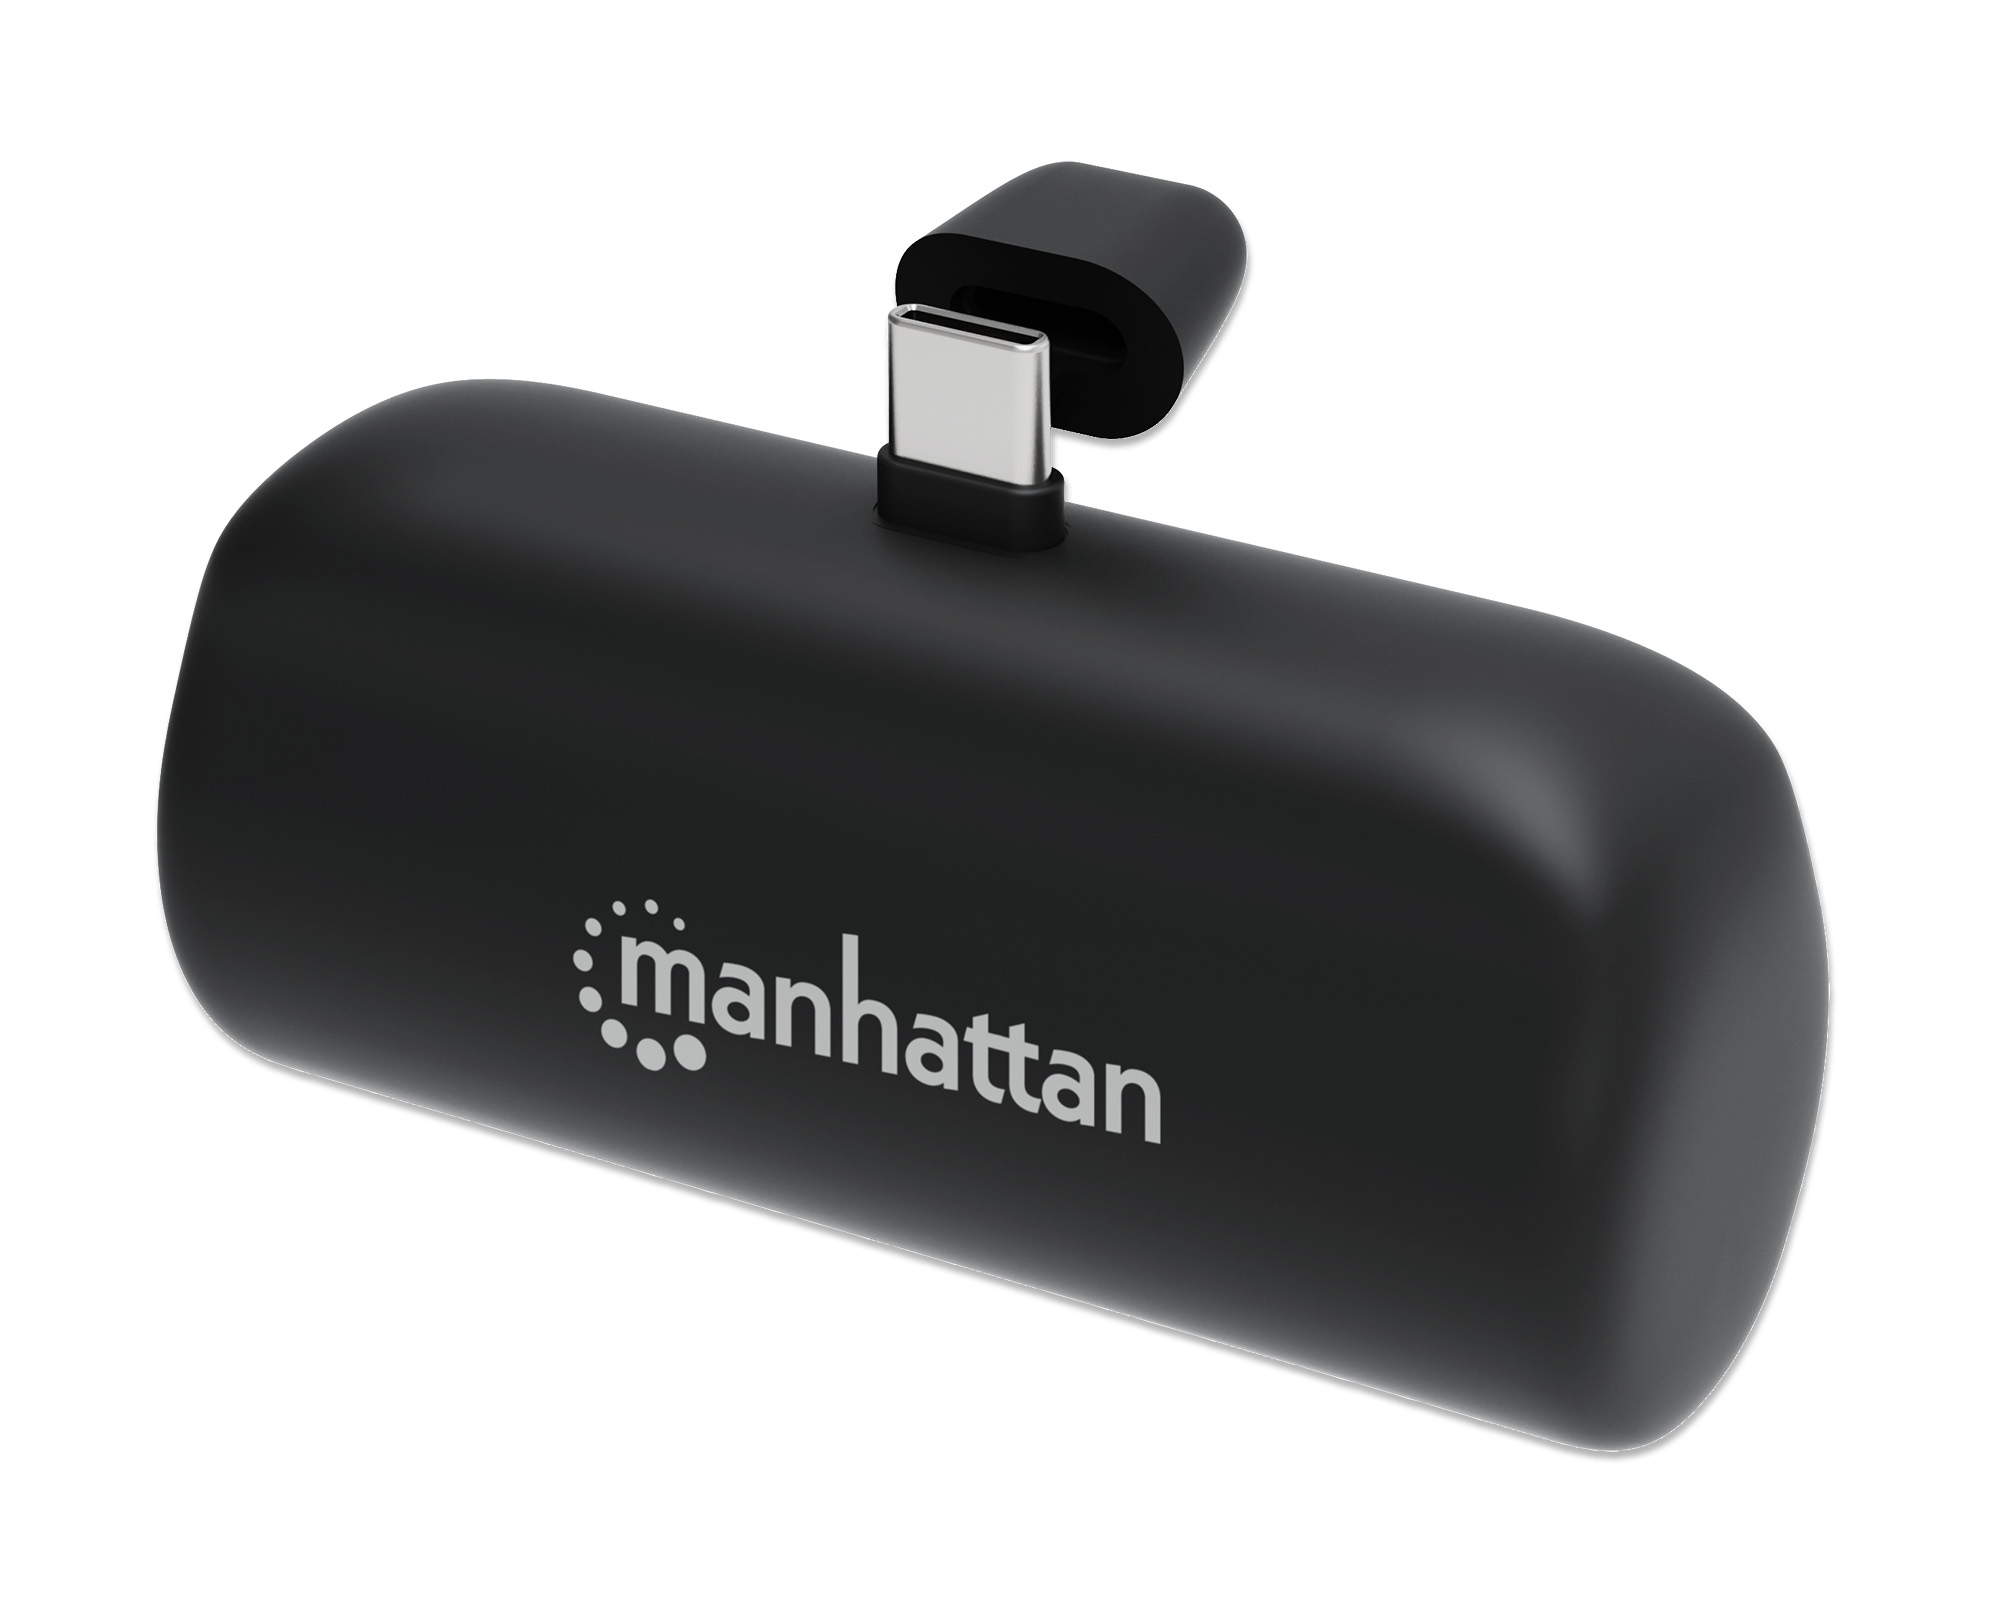 Manhattan Power Bank with integrated USB-C plug, 5000 mAh, Up to 10W output, Kickstand for Use as Charging Phone Holder, Black, One Year Warranty